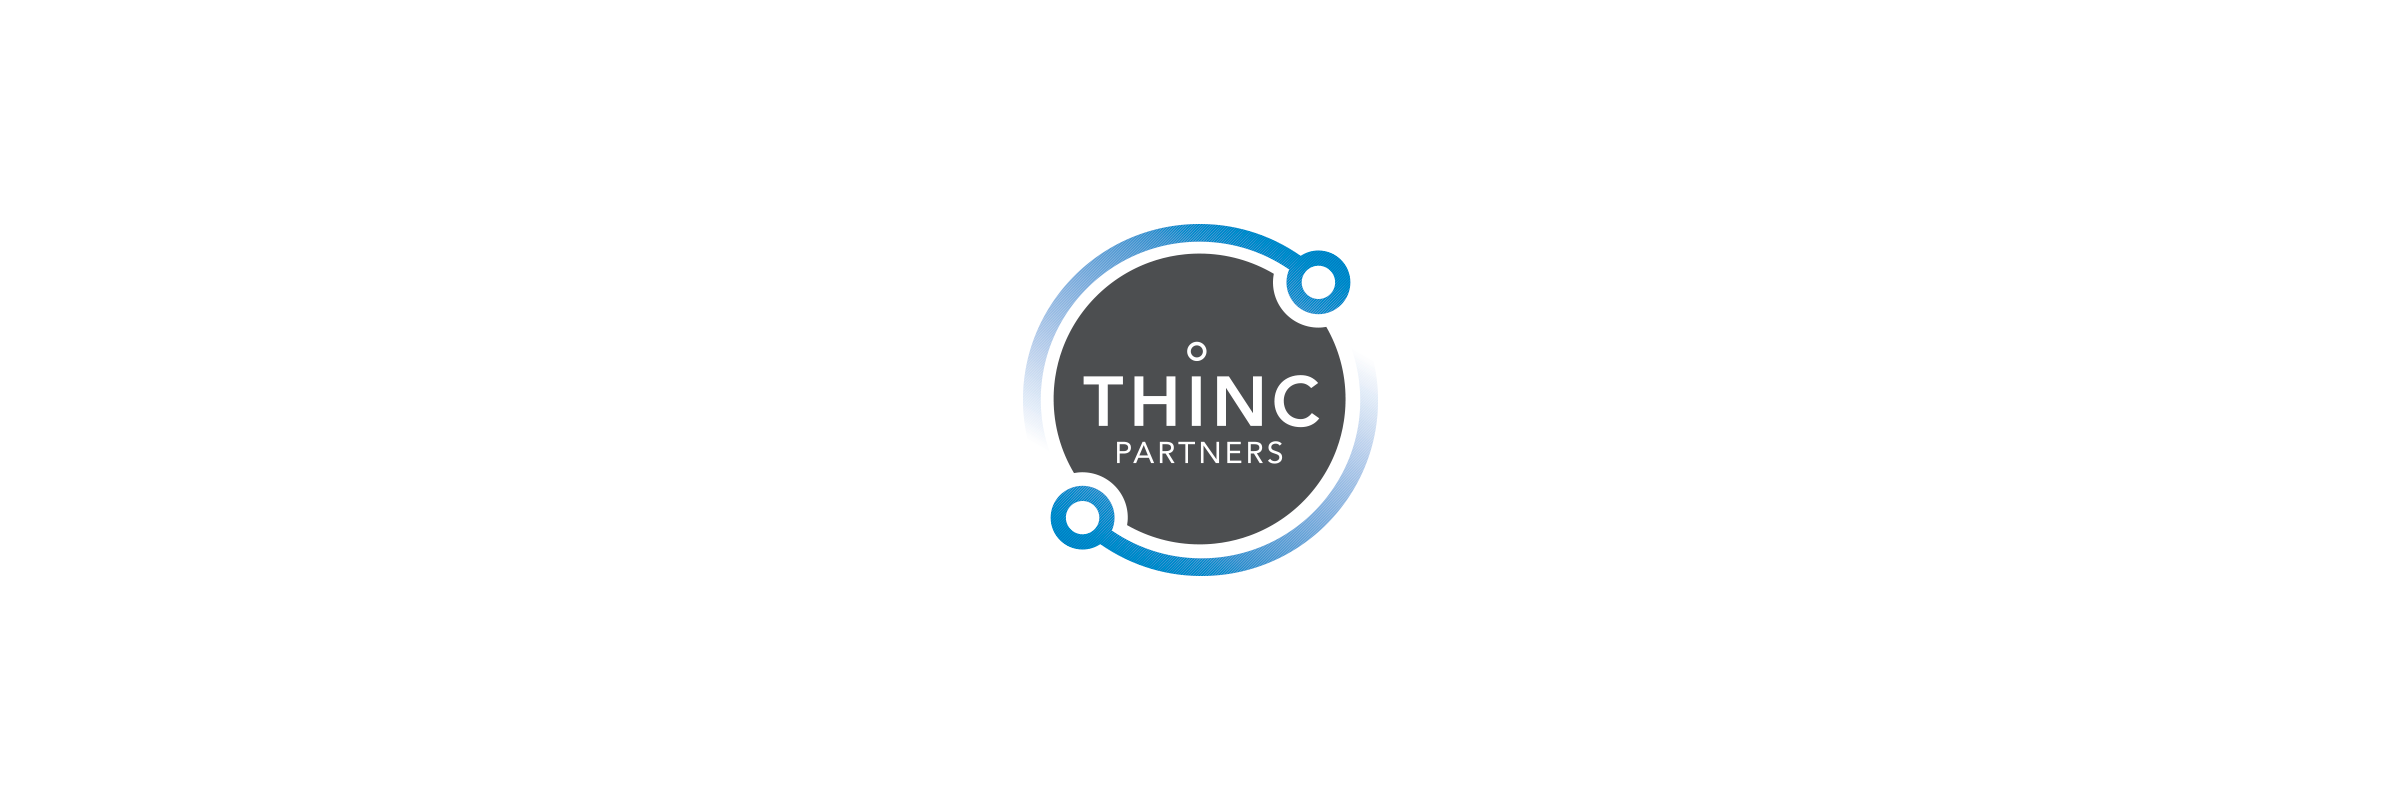 Partners in THINC